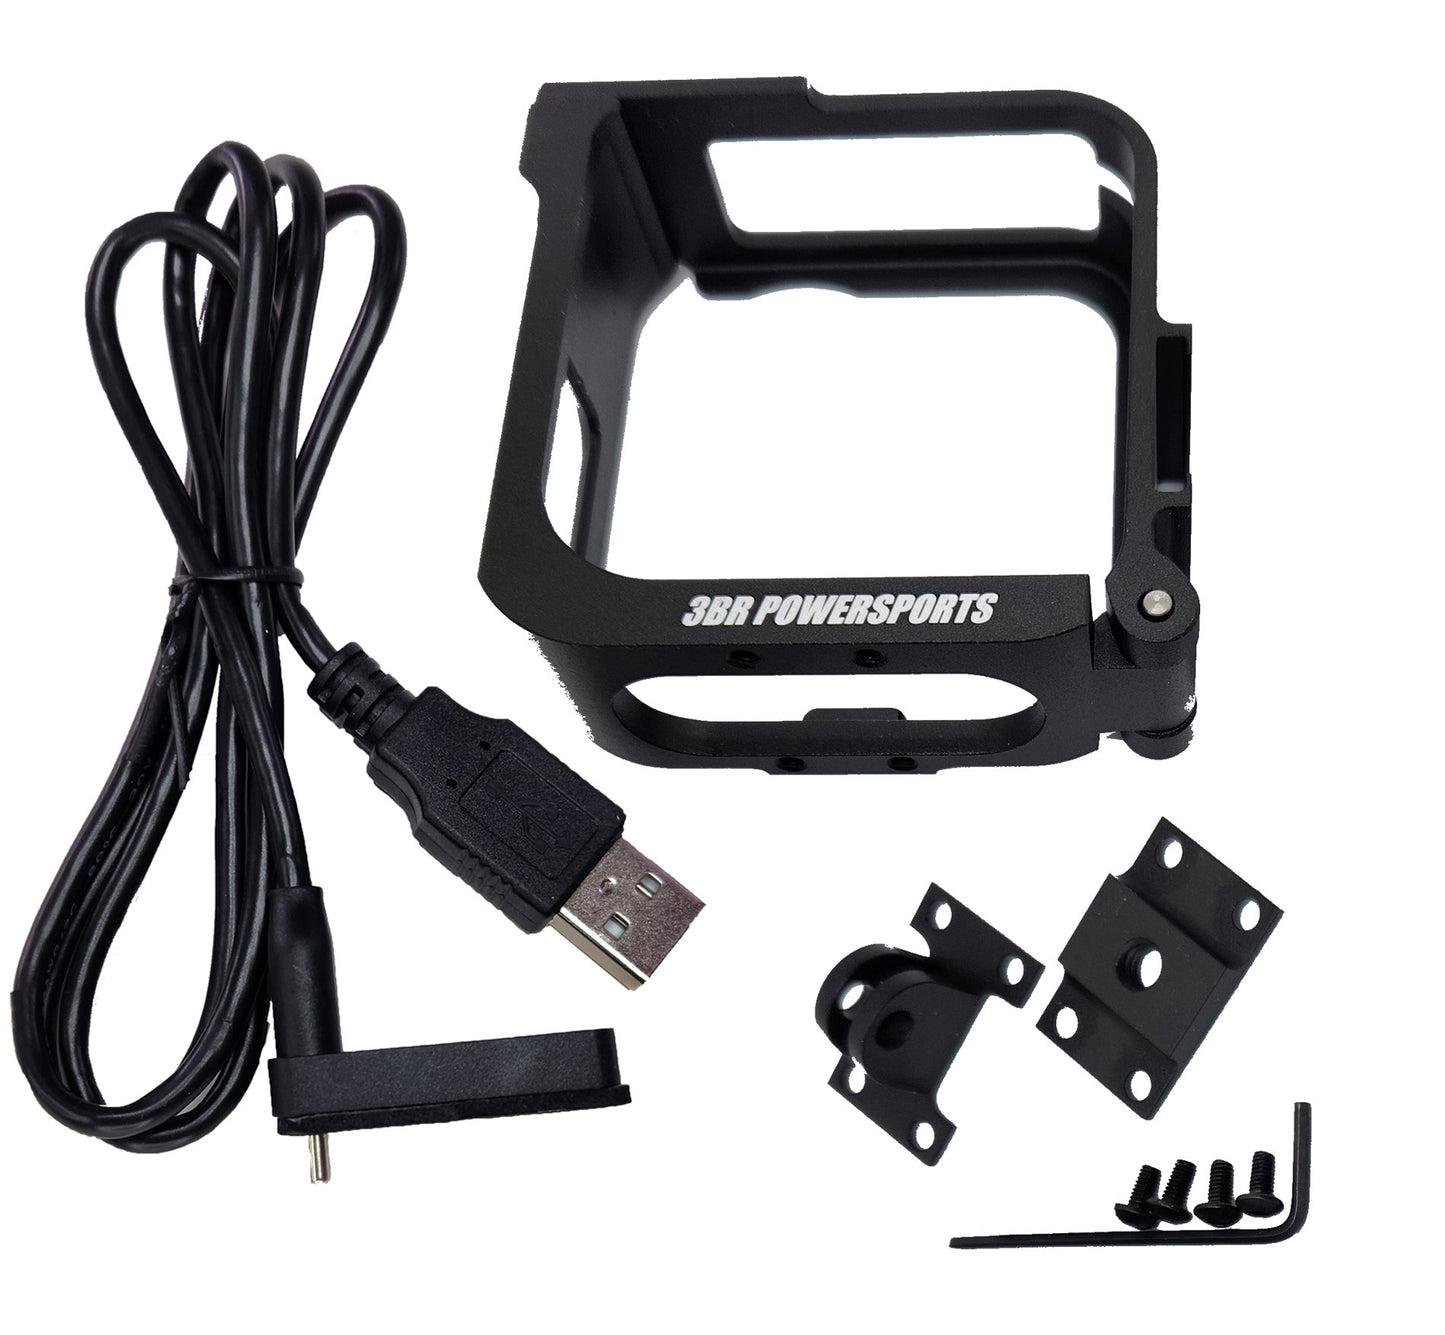 X~PWR MAX All-weather External Power Kit for GoPro MAX Camera